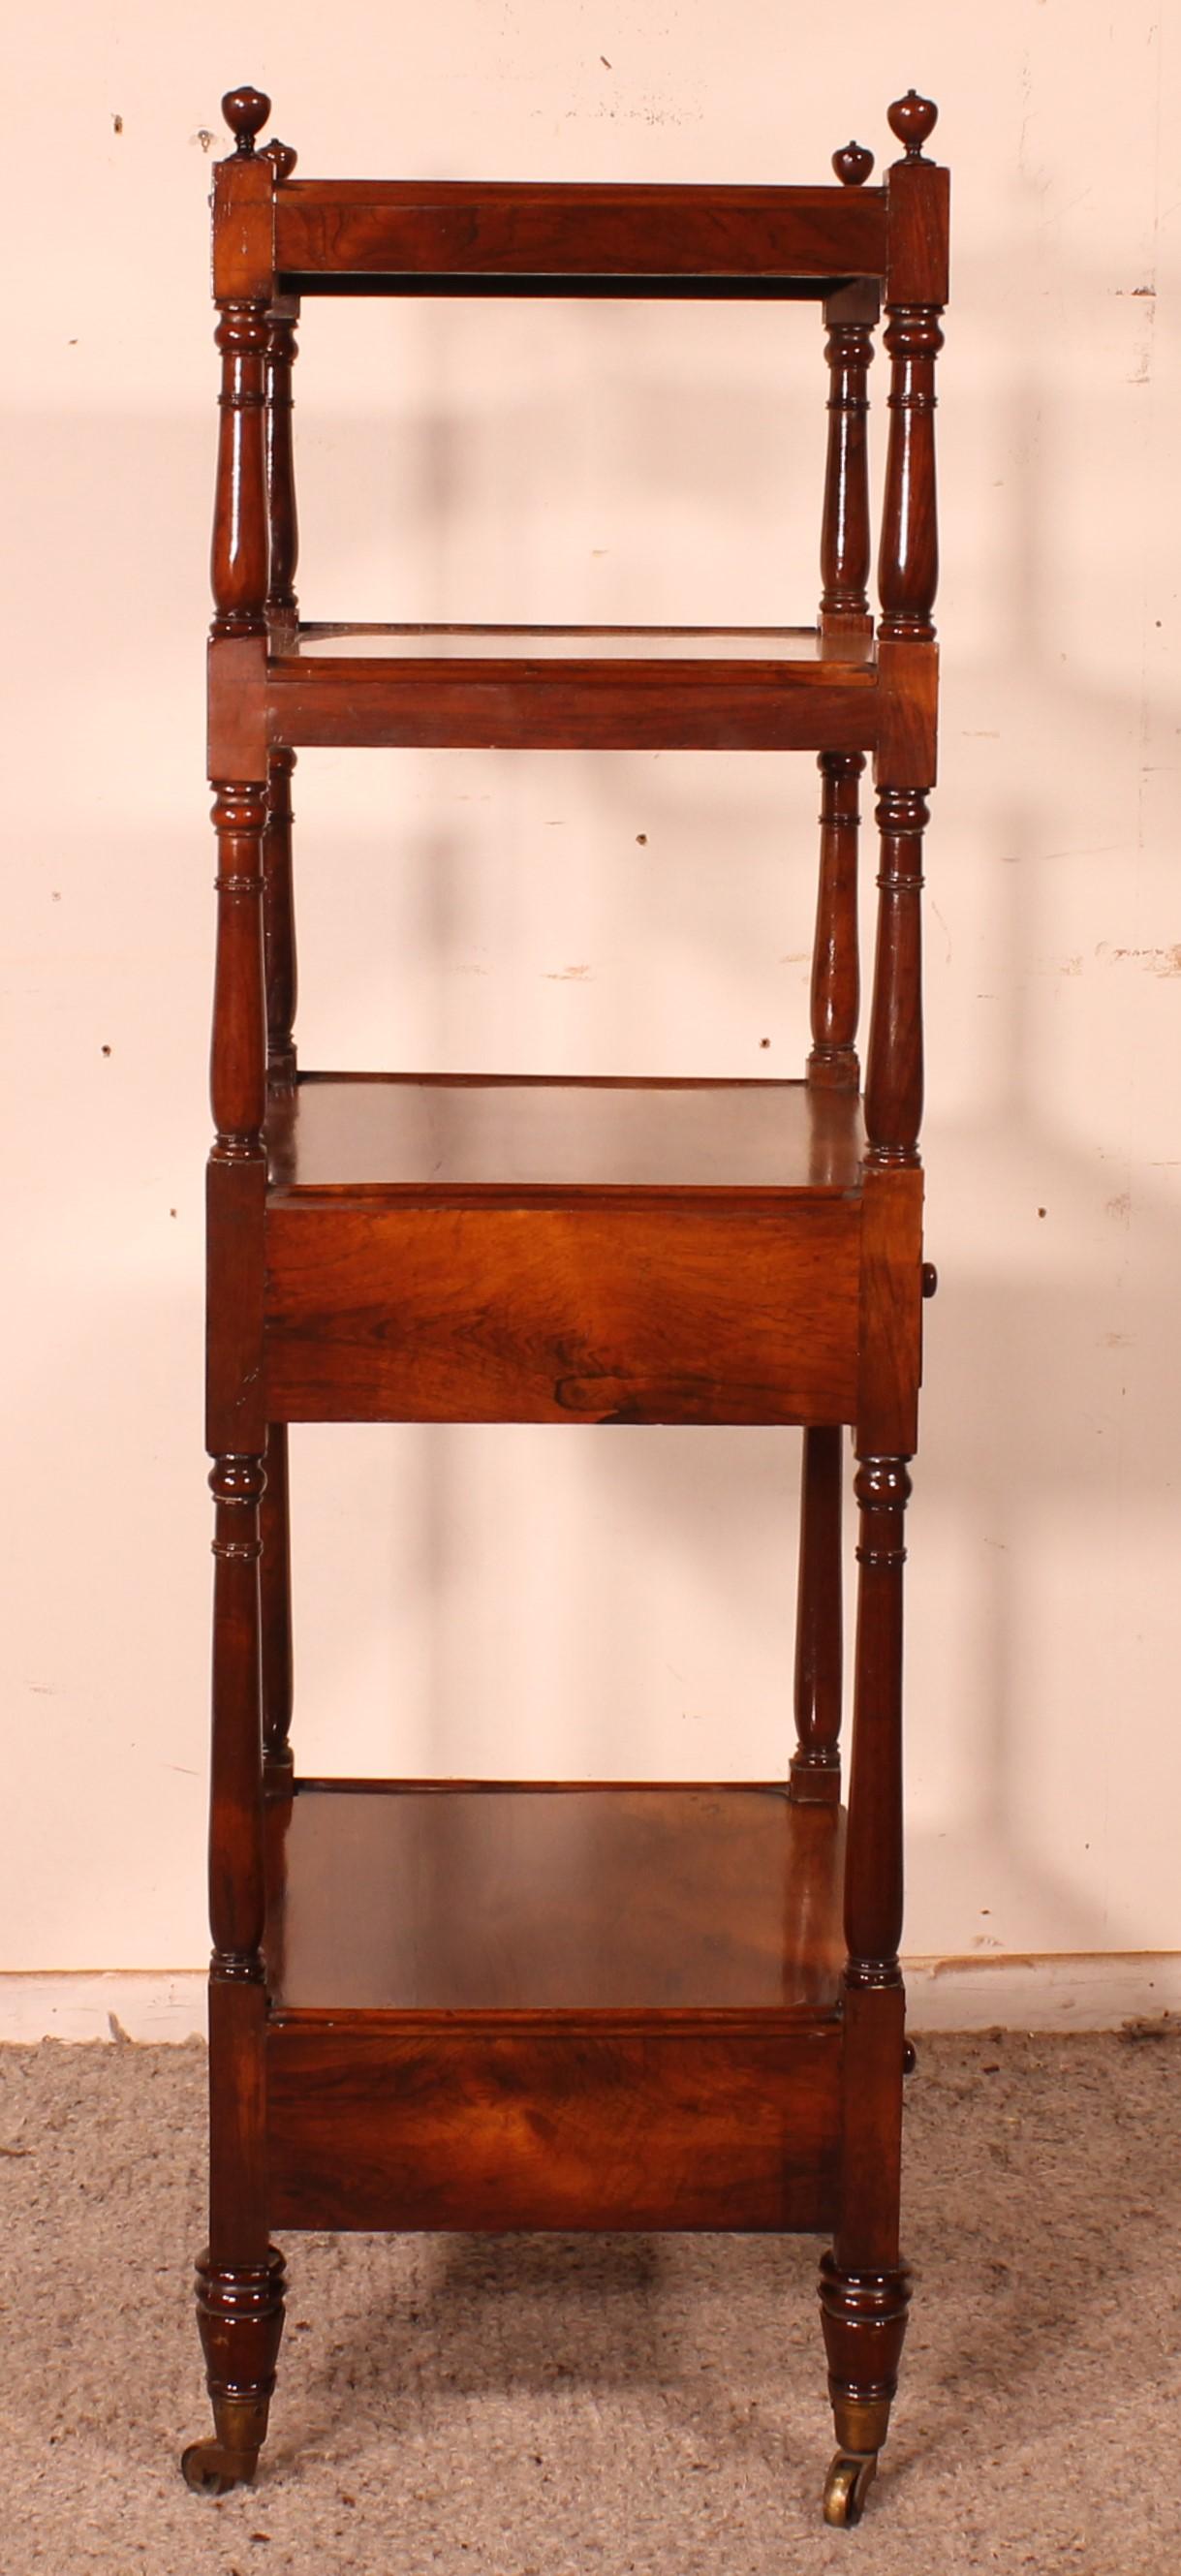 Rosewood Whatnot Or Shelf From 19th Century - England 2